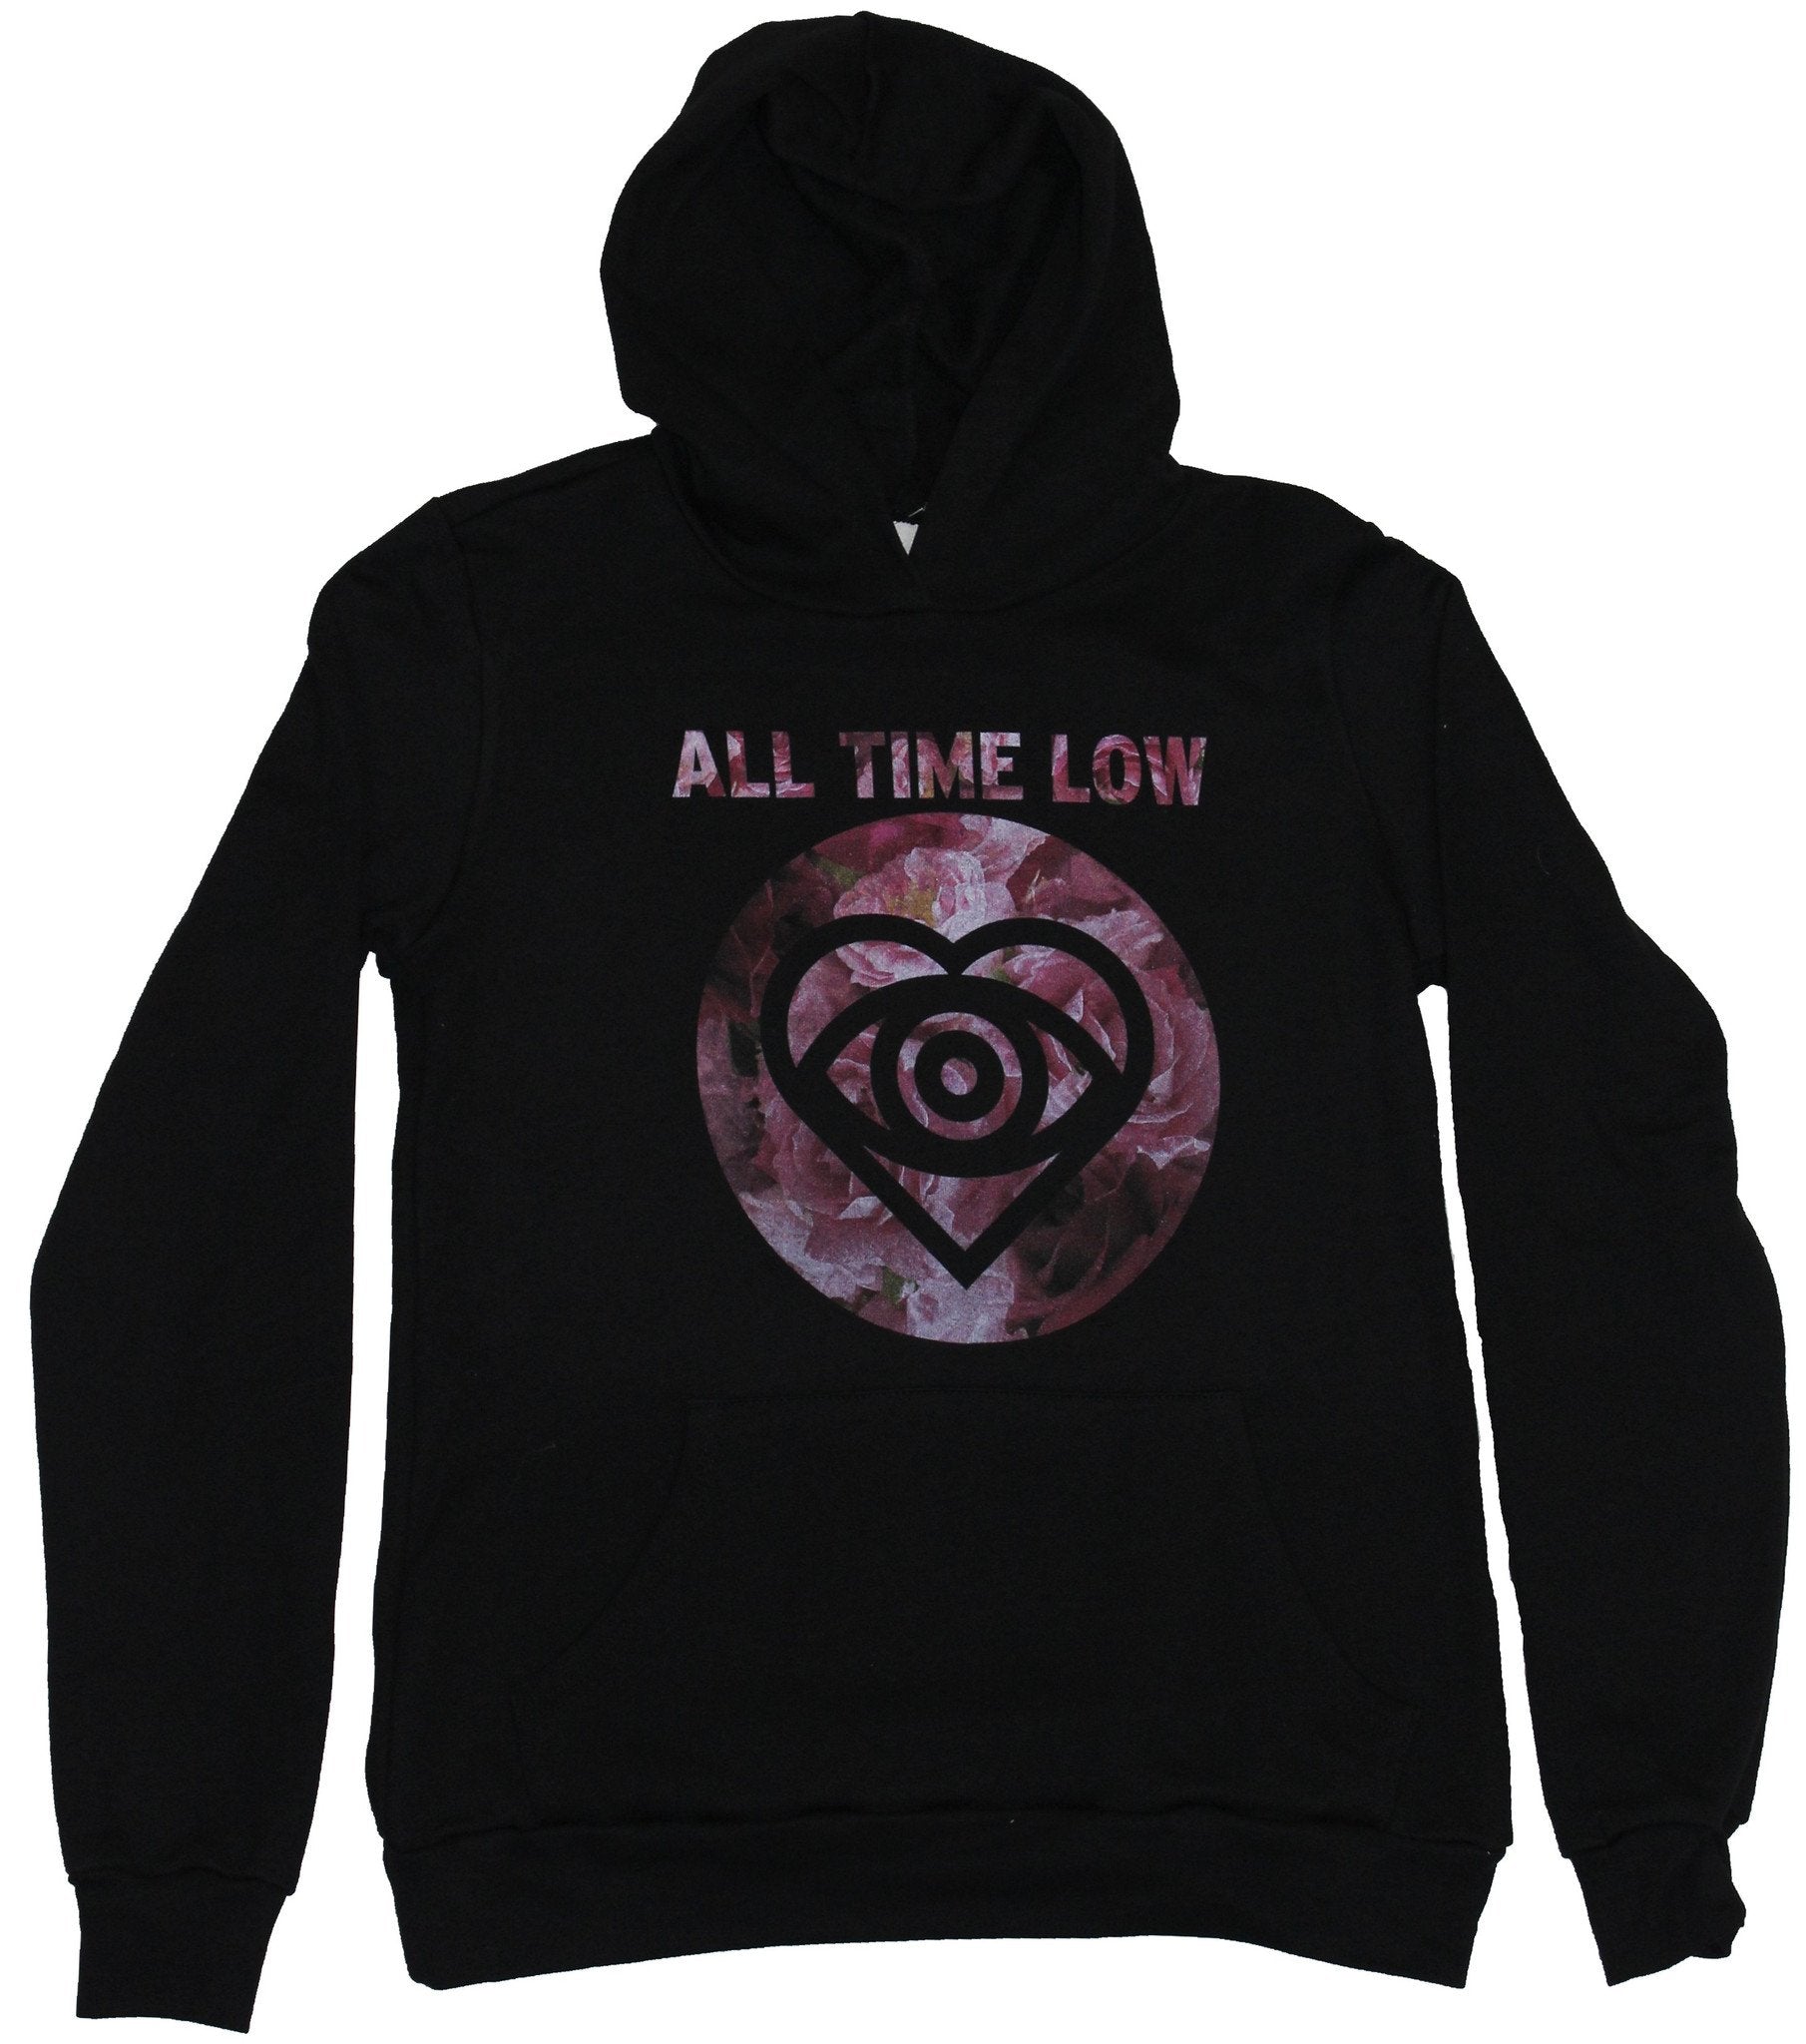 All Time Low Girls Juniors Hoodie - Floral Circle Heart Eye Image